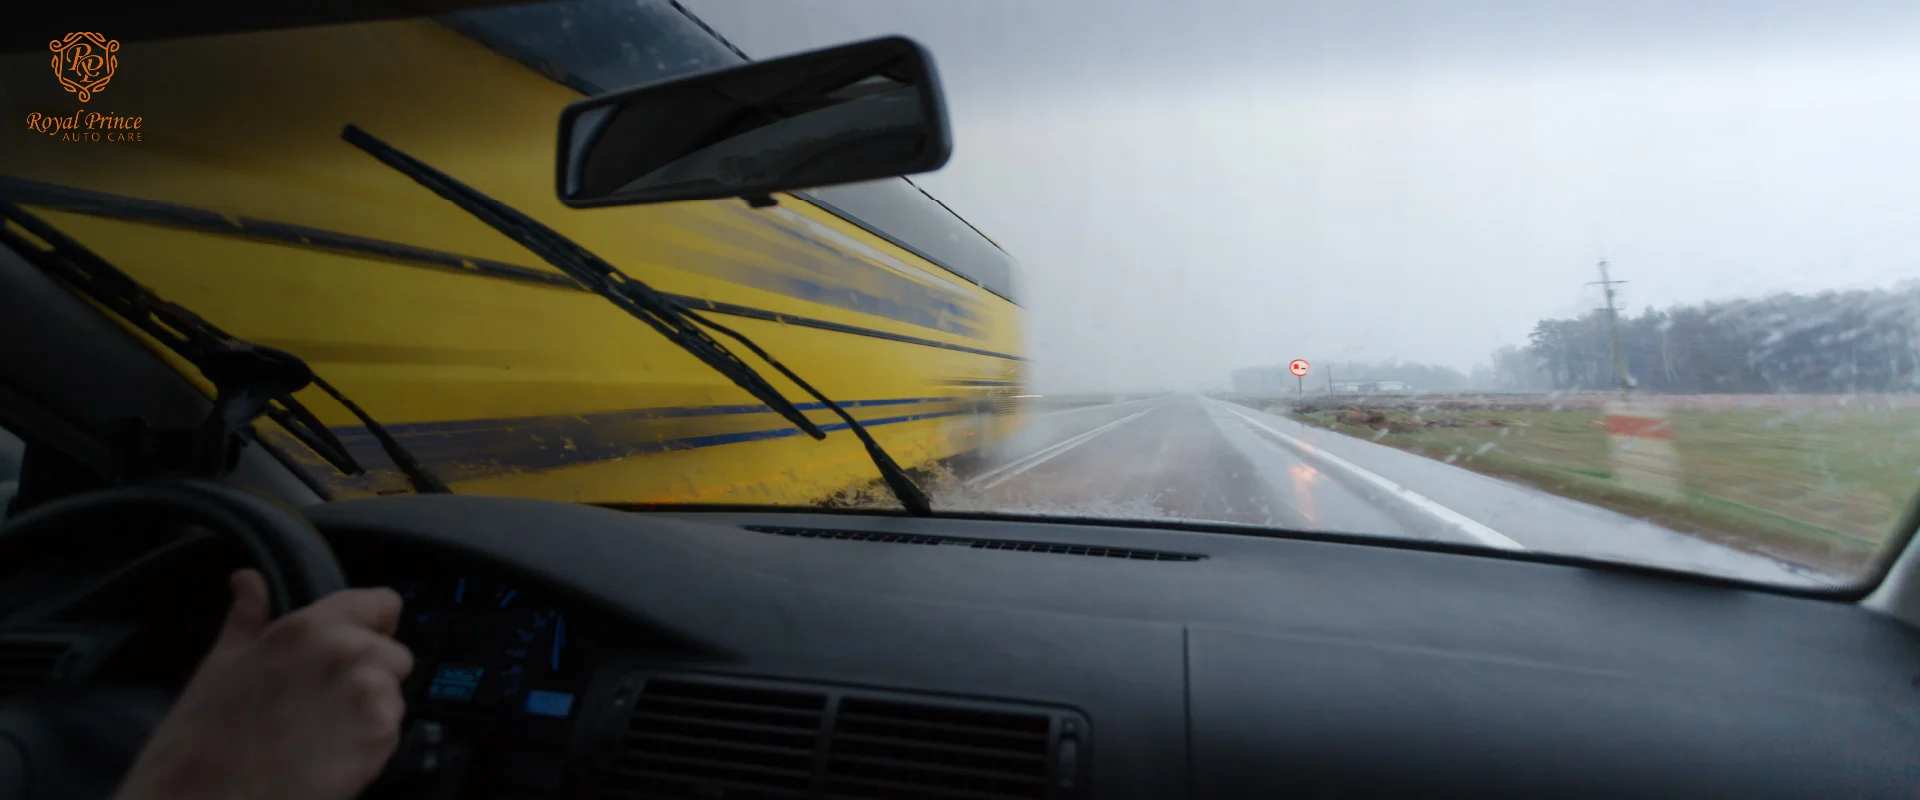 Tips for Selecting the Right Windshield Wipers for Your Car